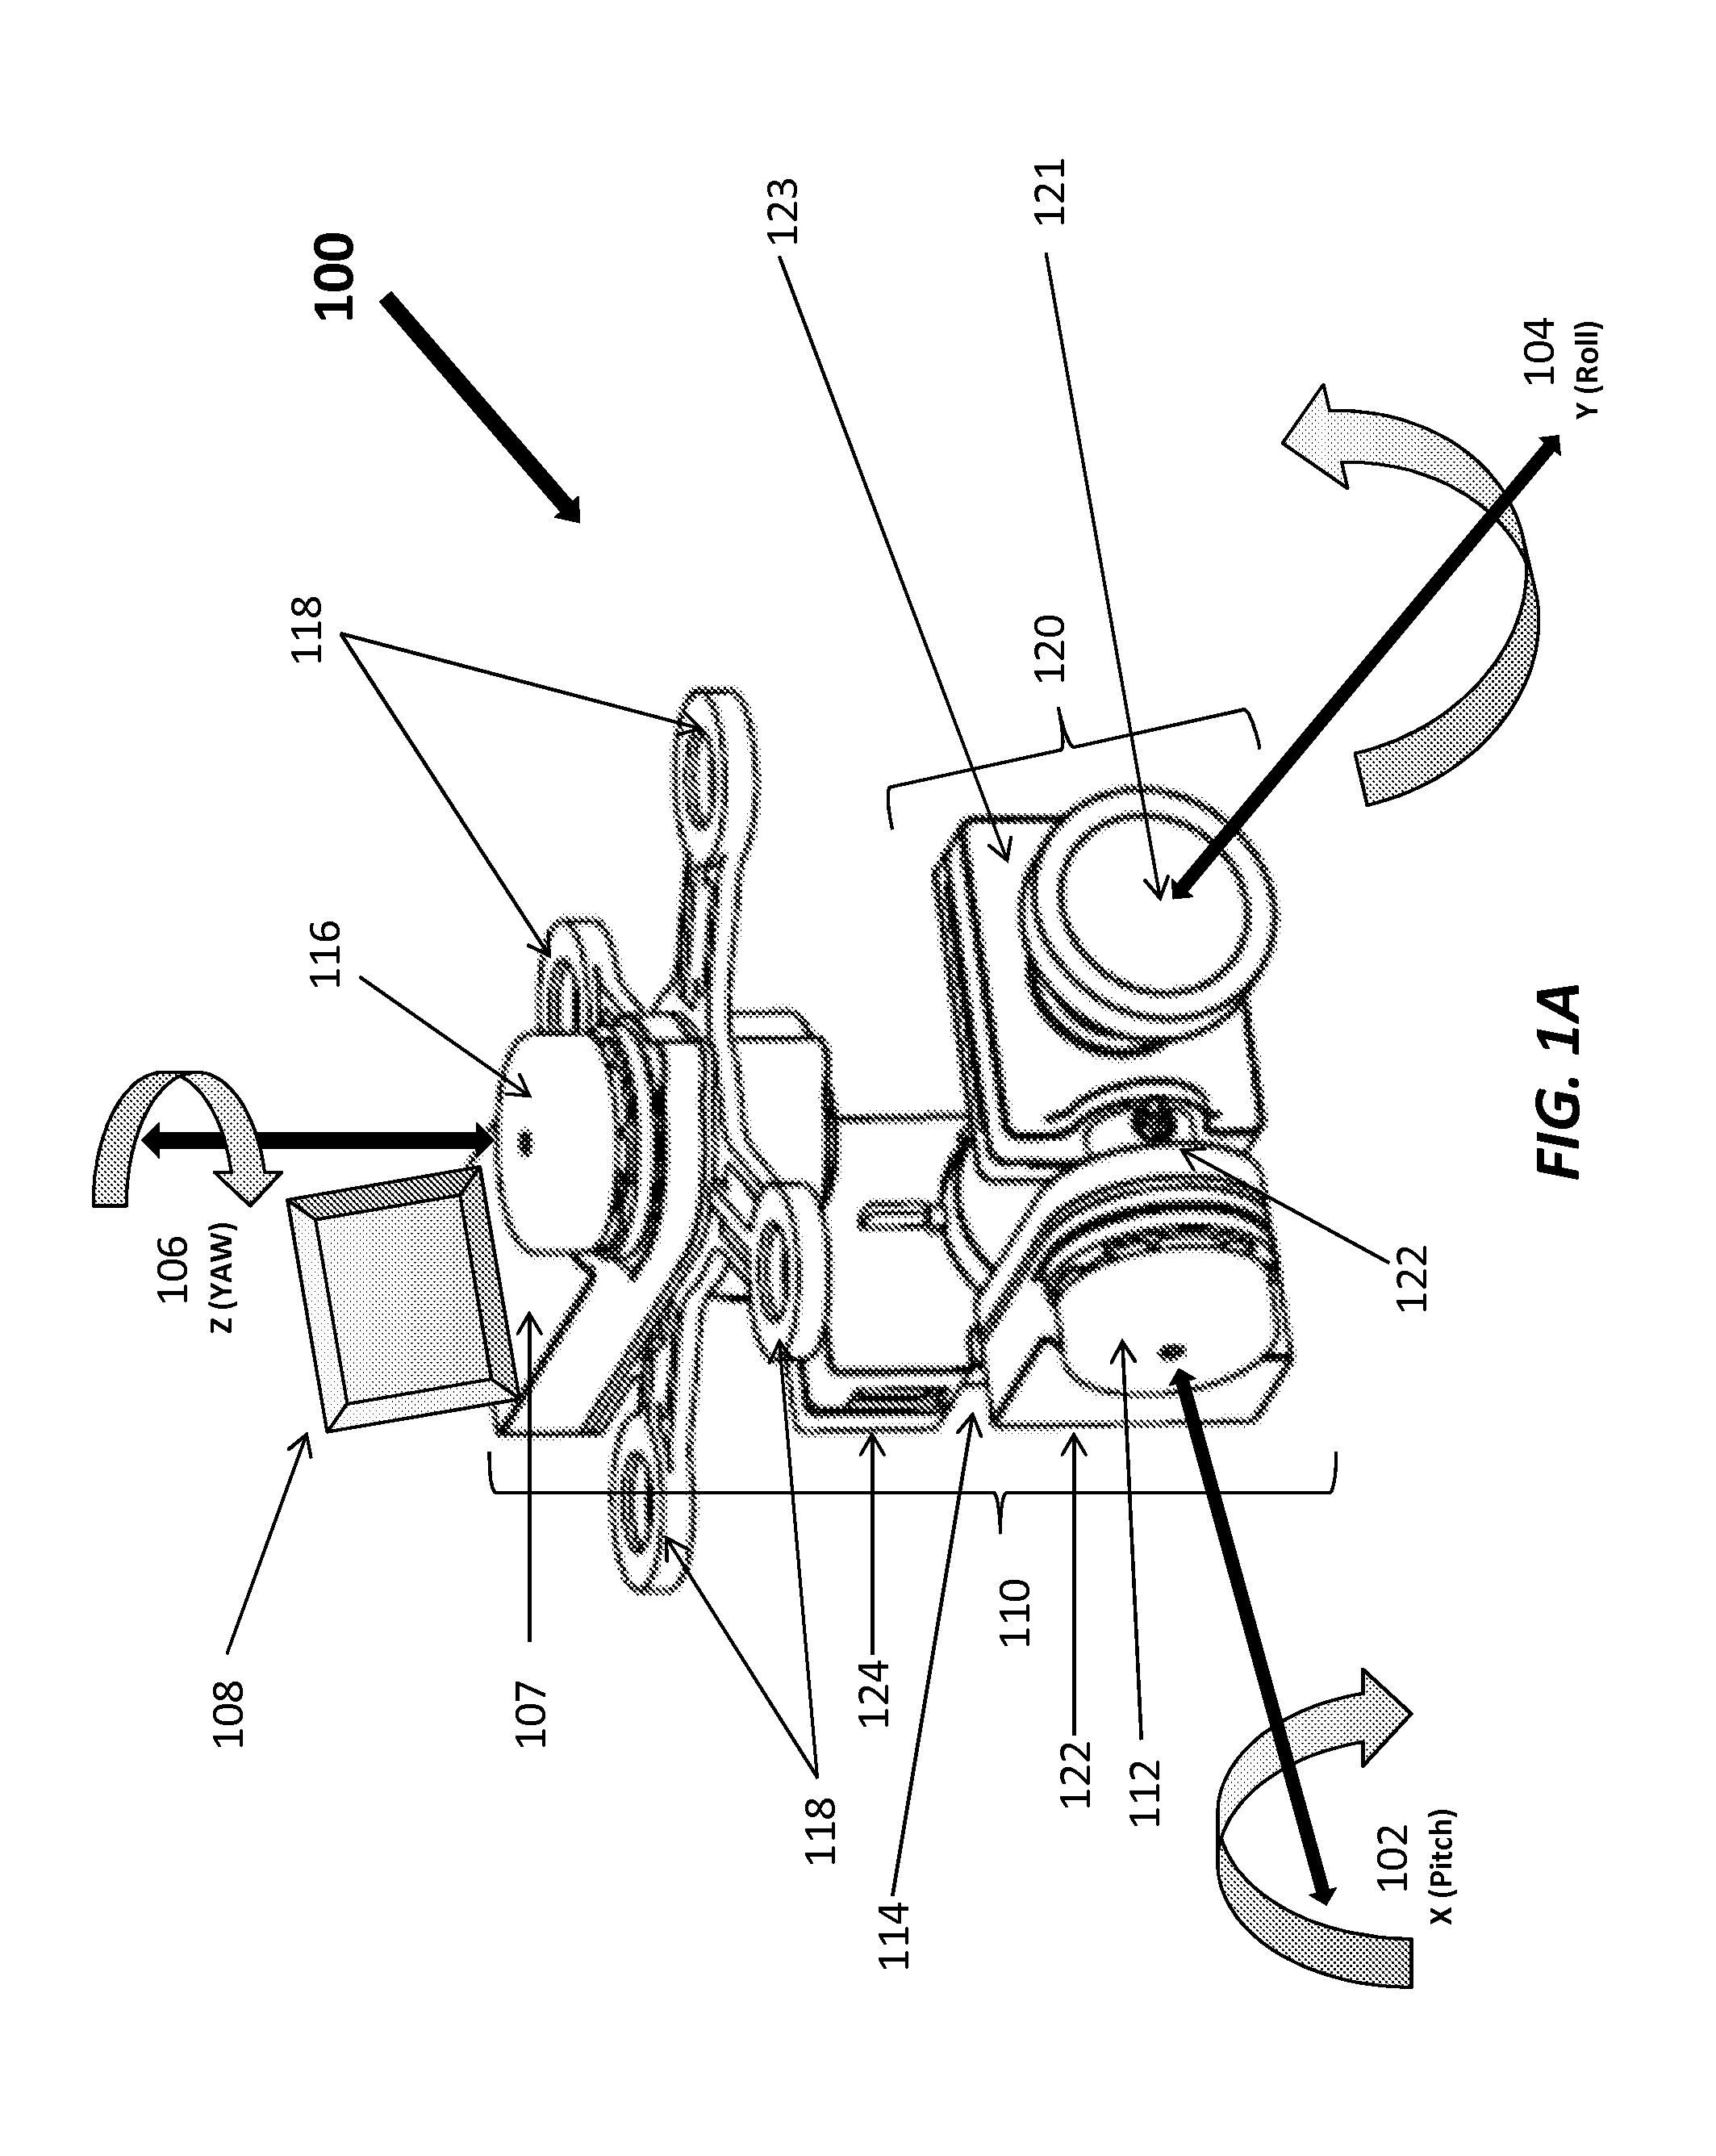 Apparatus and methods for stabilization and vibration reduction